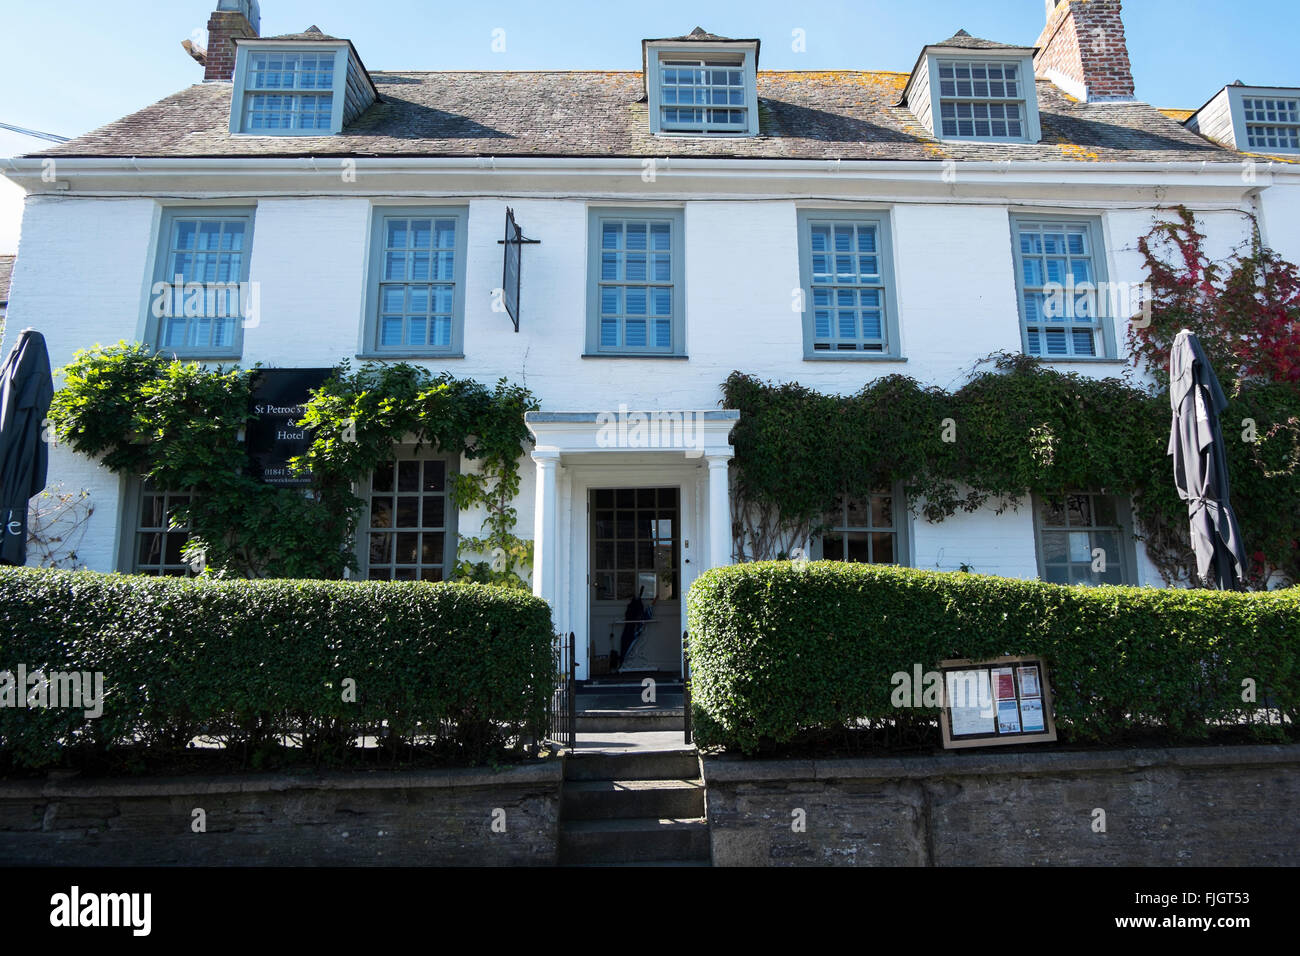 St Petroc's restaurant and hotel owned by Rick Stein in Padstow, Cornwall, UK. Stock Photo